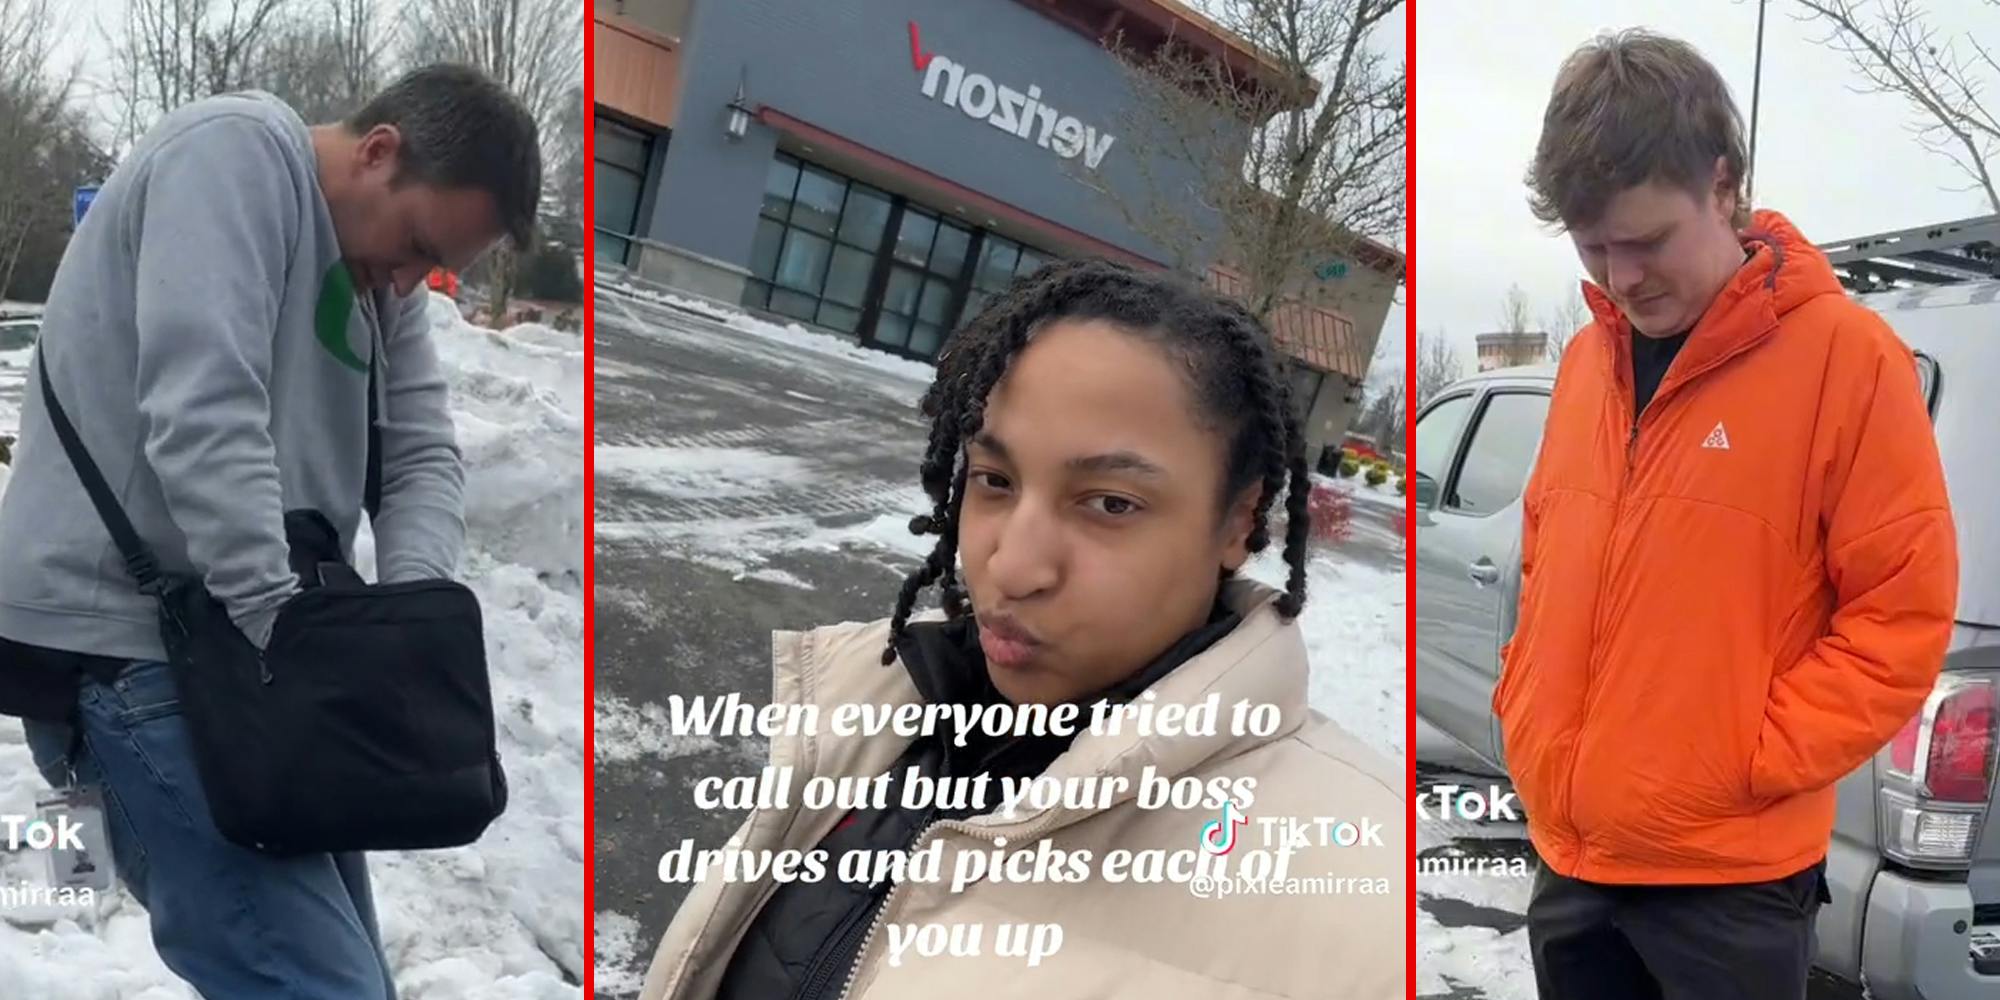 man searching bag (l) young woman outside Verizon store with caption "When everyone tried to call out but your boss drives and picks each of you up" (c) young man looking down distraught (r)